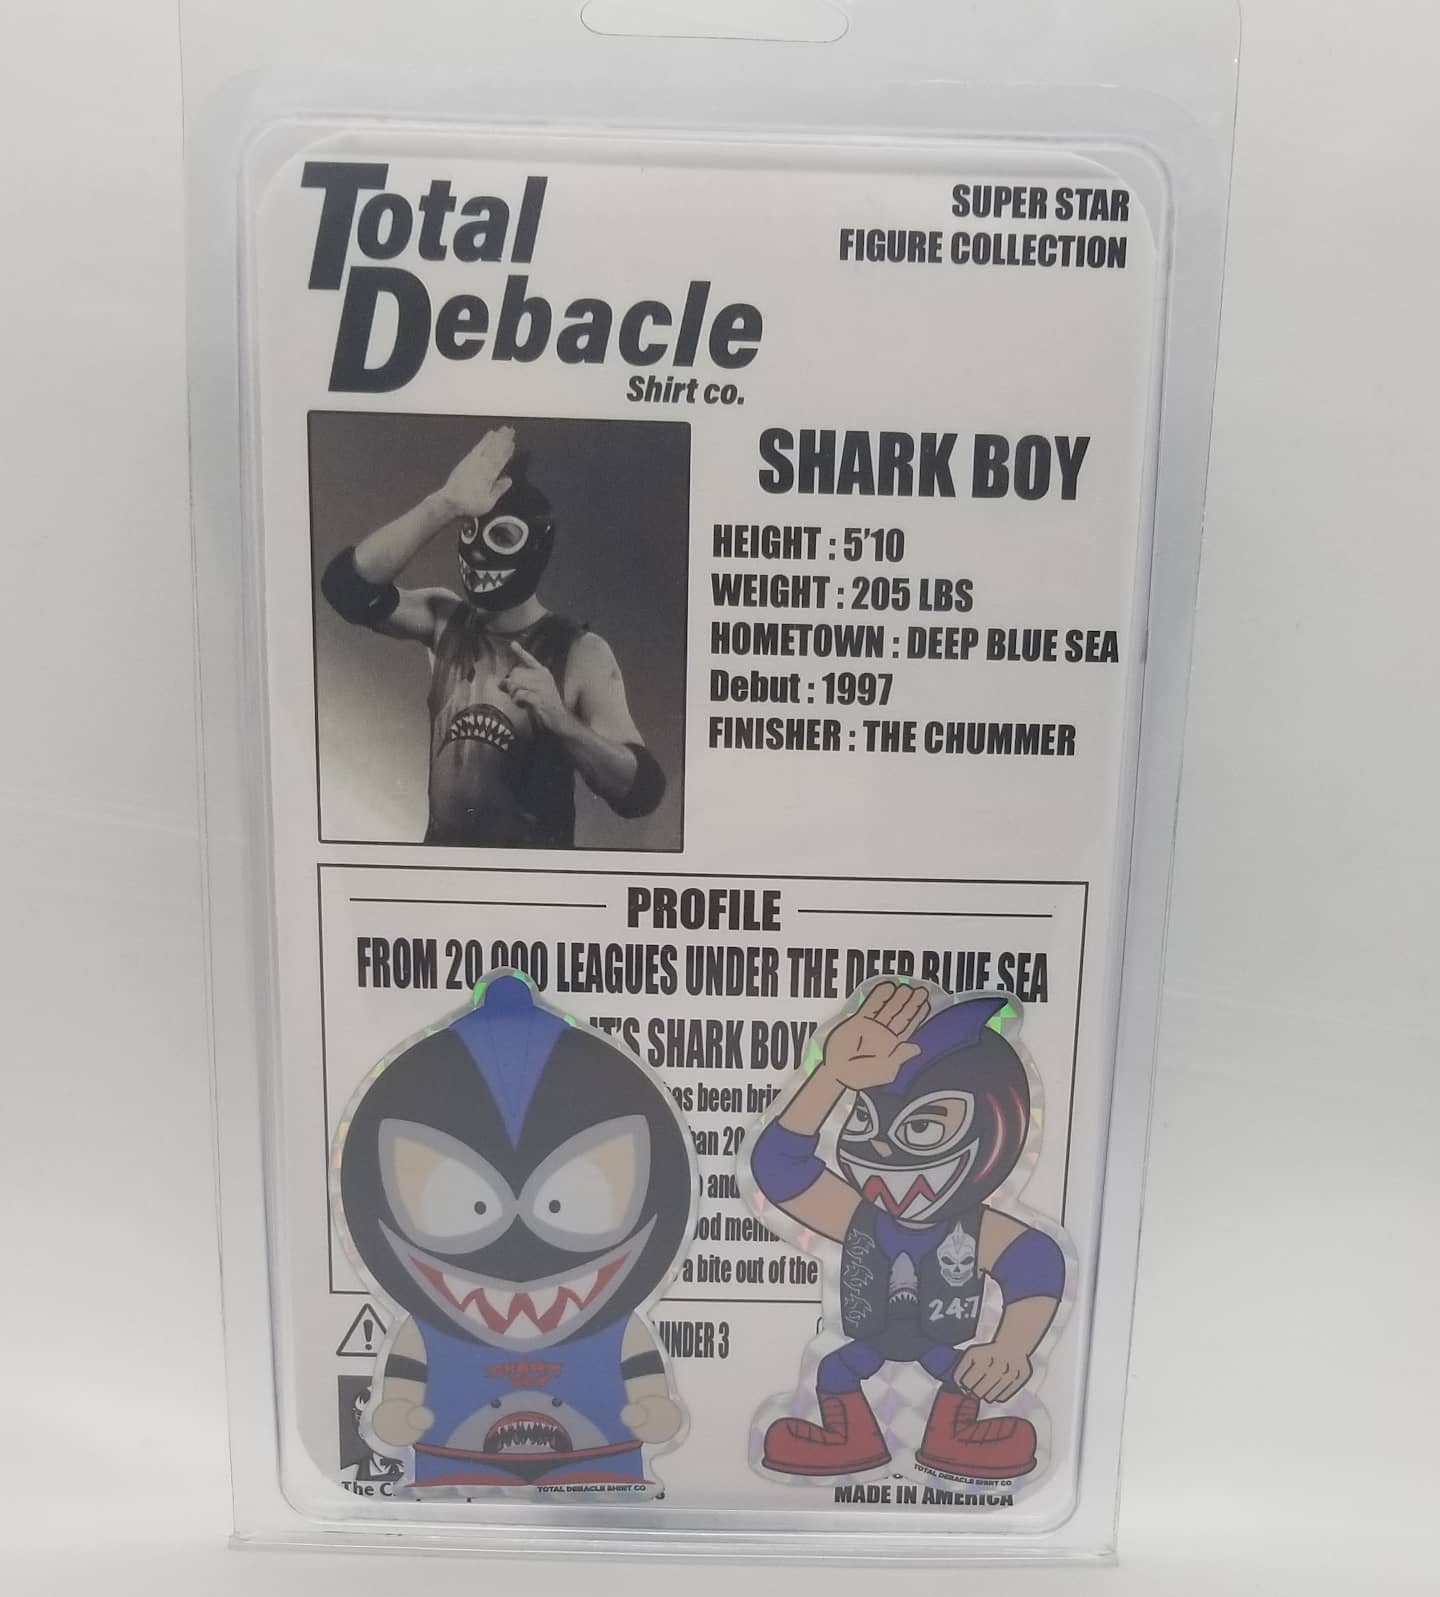 Total Debacle Shirt Co. Super Star Figure Collection Shark Boy [Clear Version]